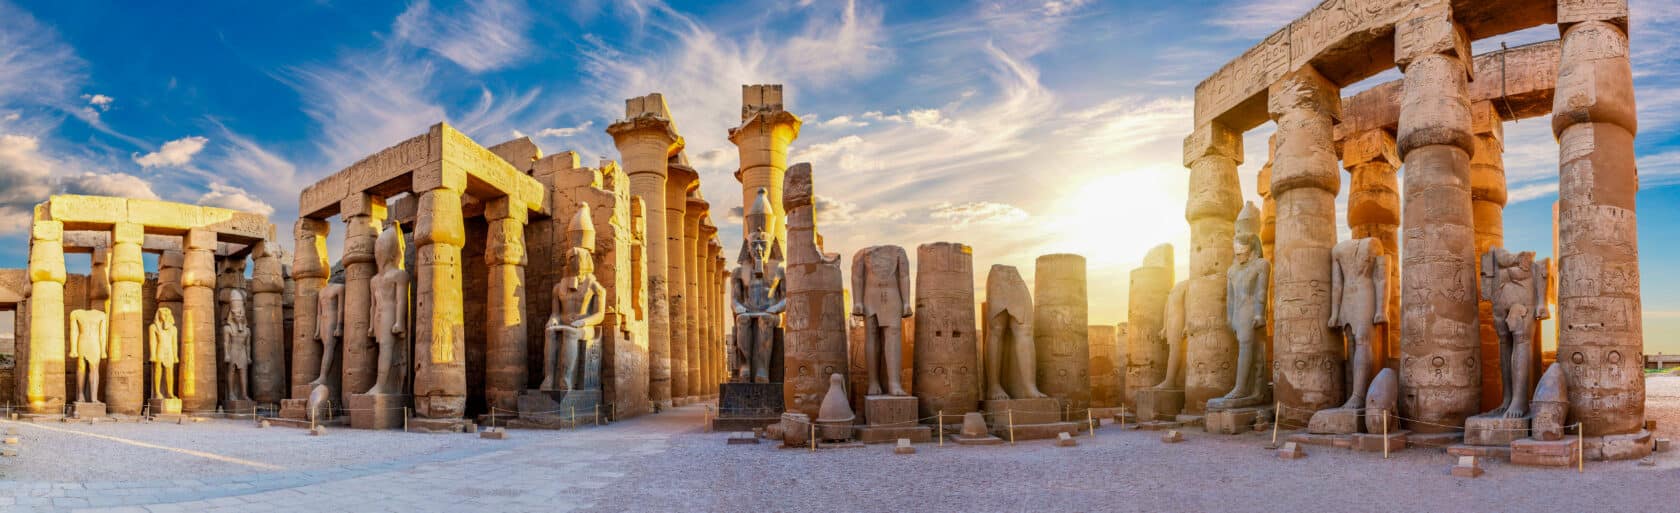 Ancient Luxor Temple, sunset panorama view, Egypt